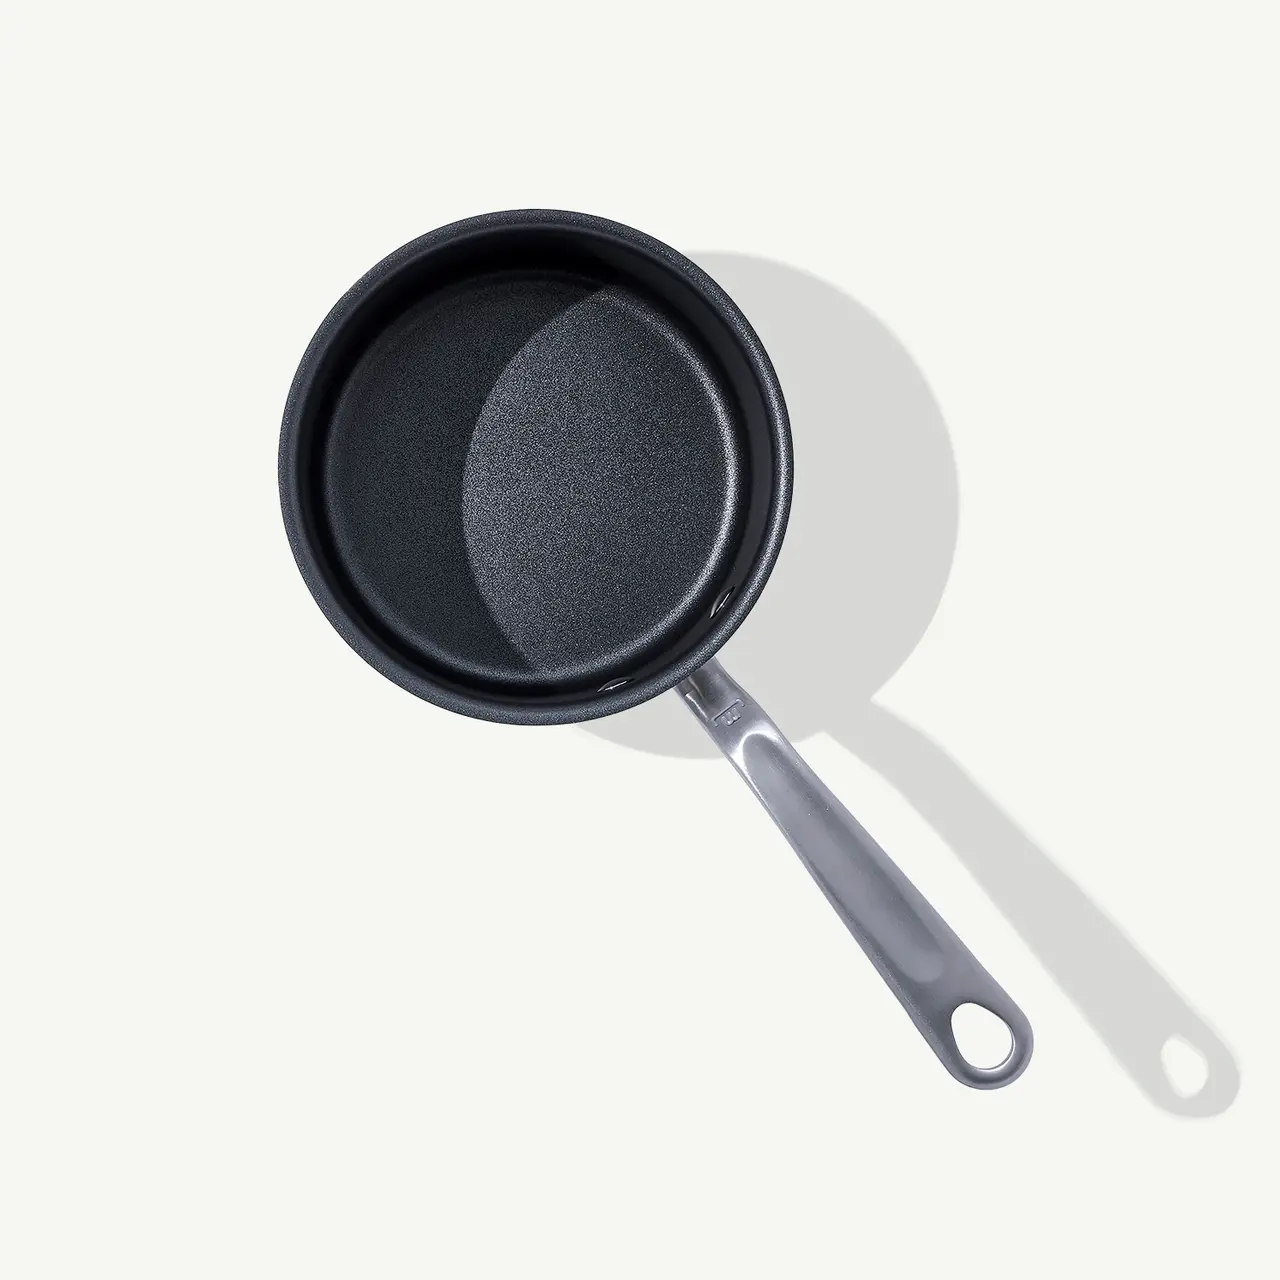 A non-stick frying pan is centered on a light background, casting a soft shadow.